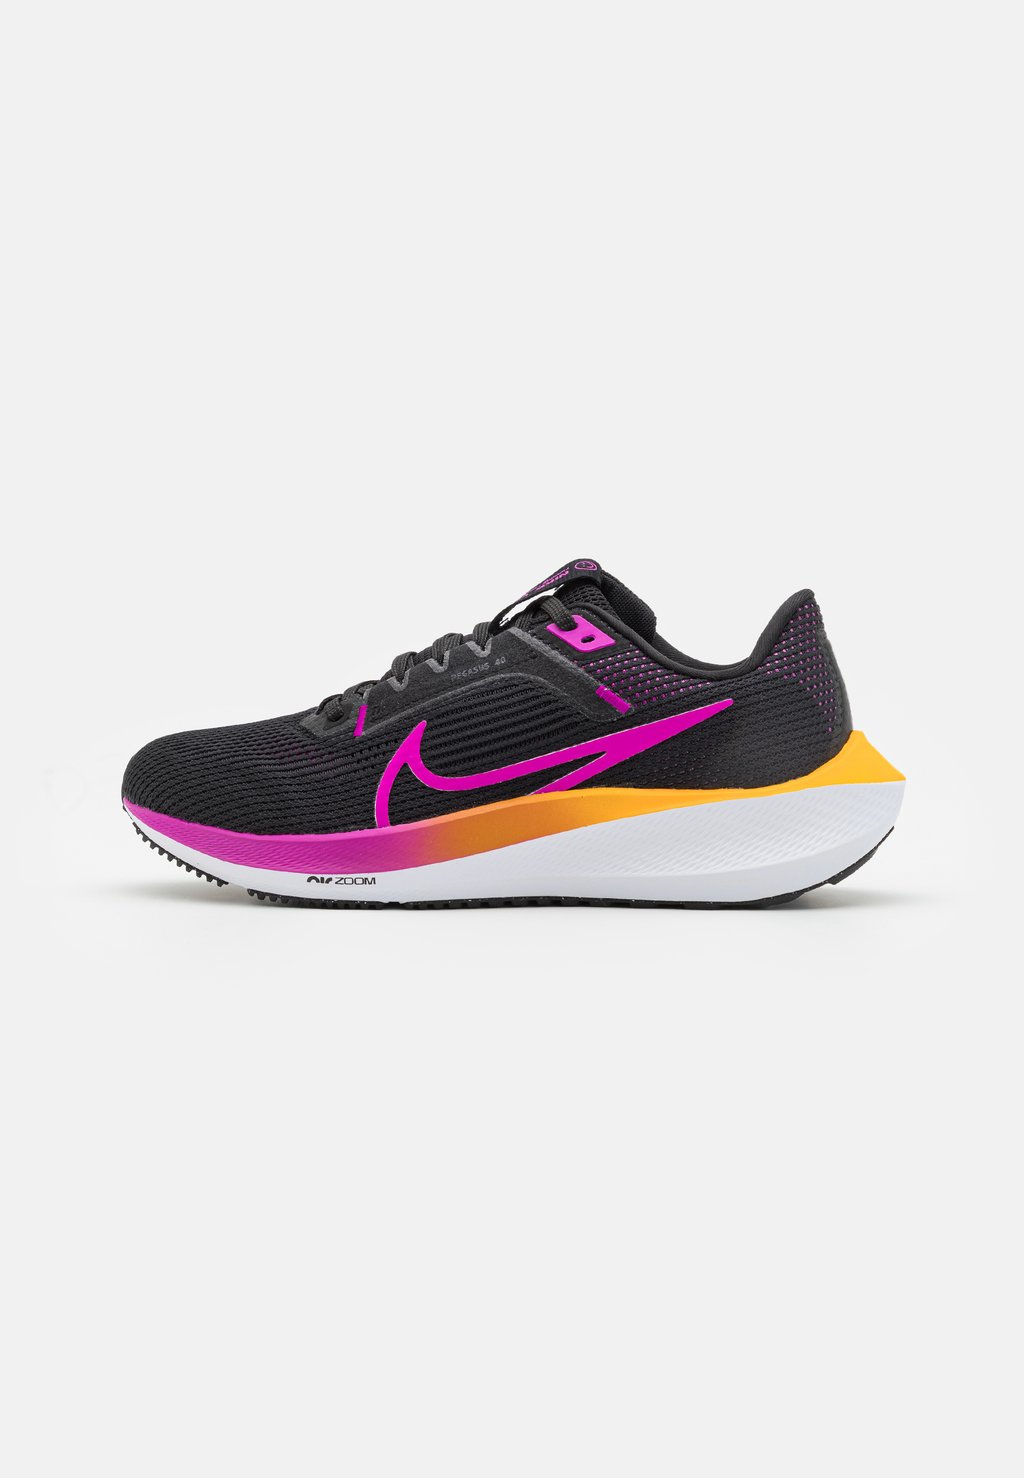 Нейтральные кроссовки AIR ZOOM PEGASUS 40 Nike, цвет black/hyper violet/laser orange/white/anthracite/reflective silver 30mm 3m white night flying hot silver laser pet tape fantasy butterfly planet bullet journaling accessories stickers aesthetic